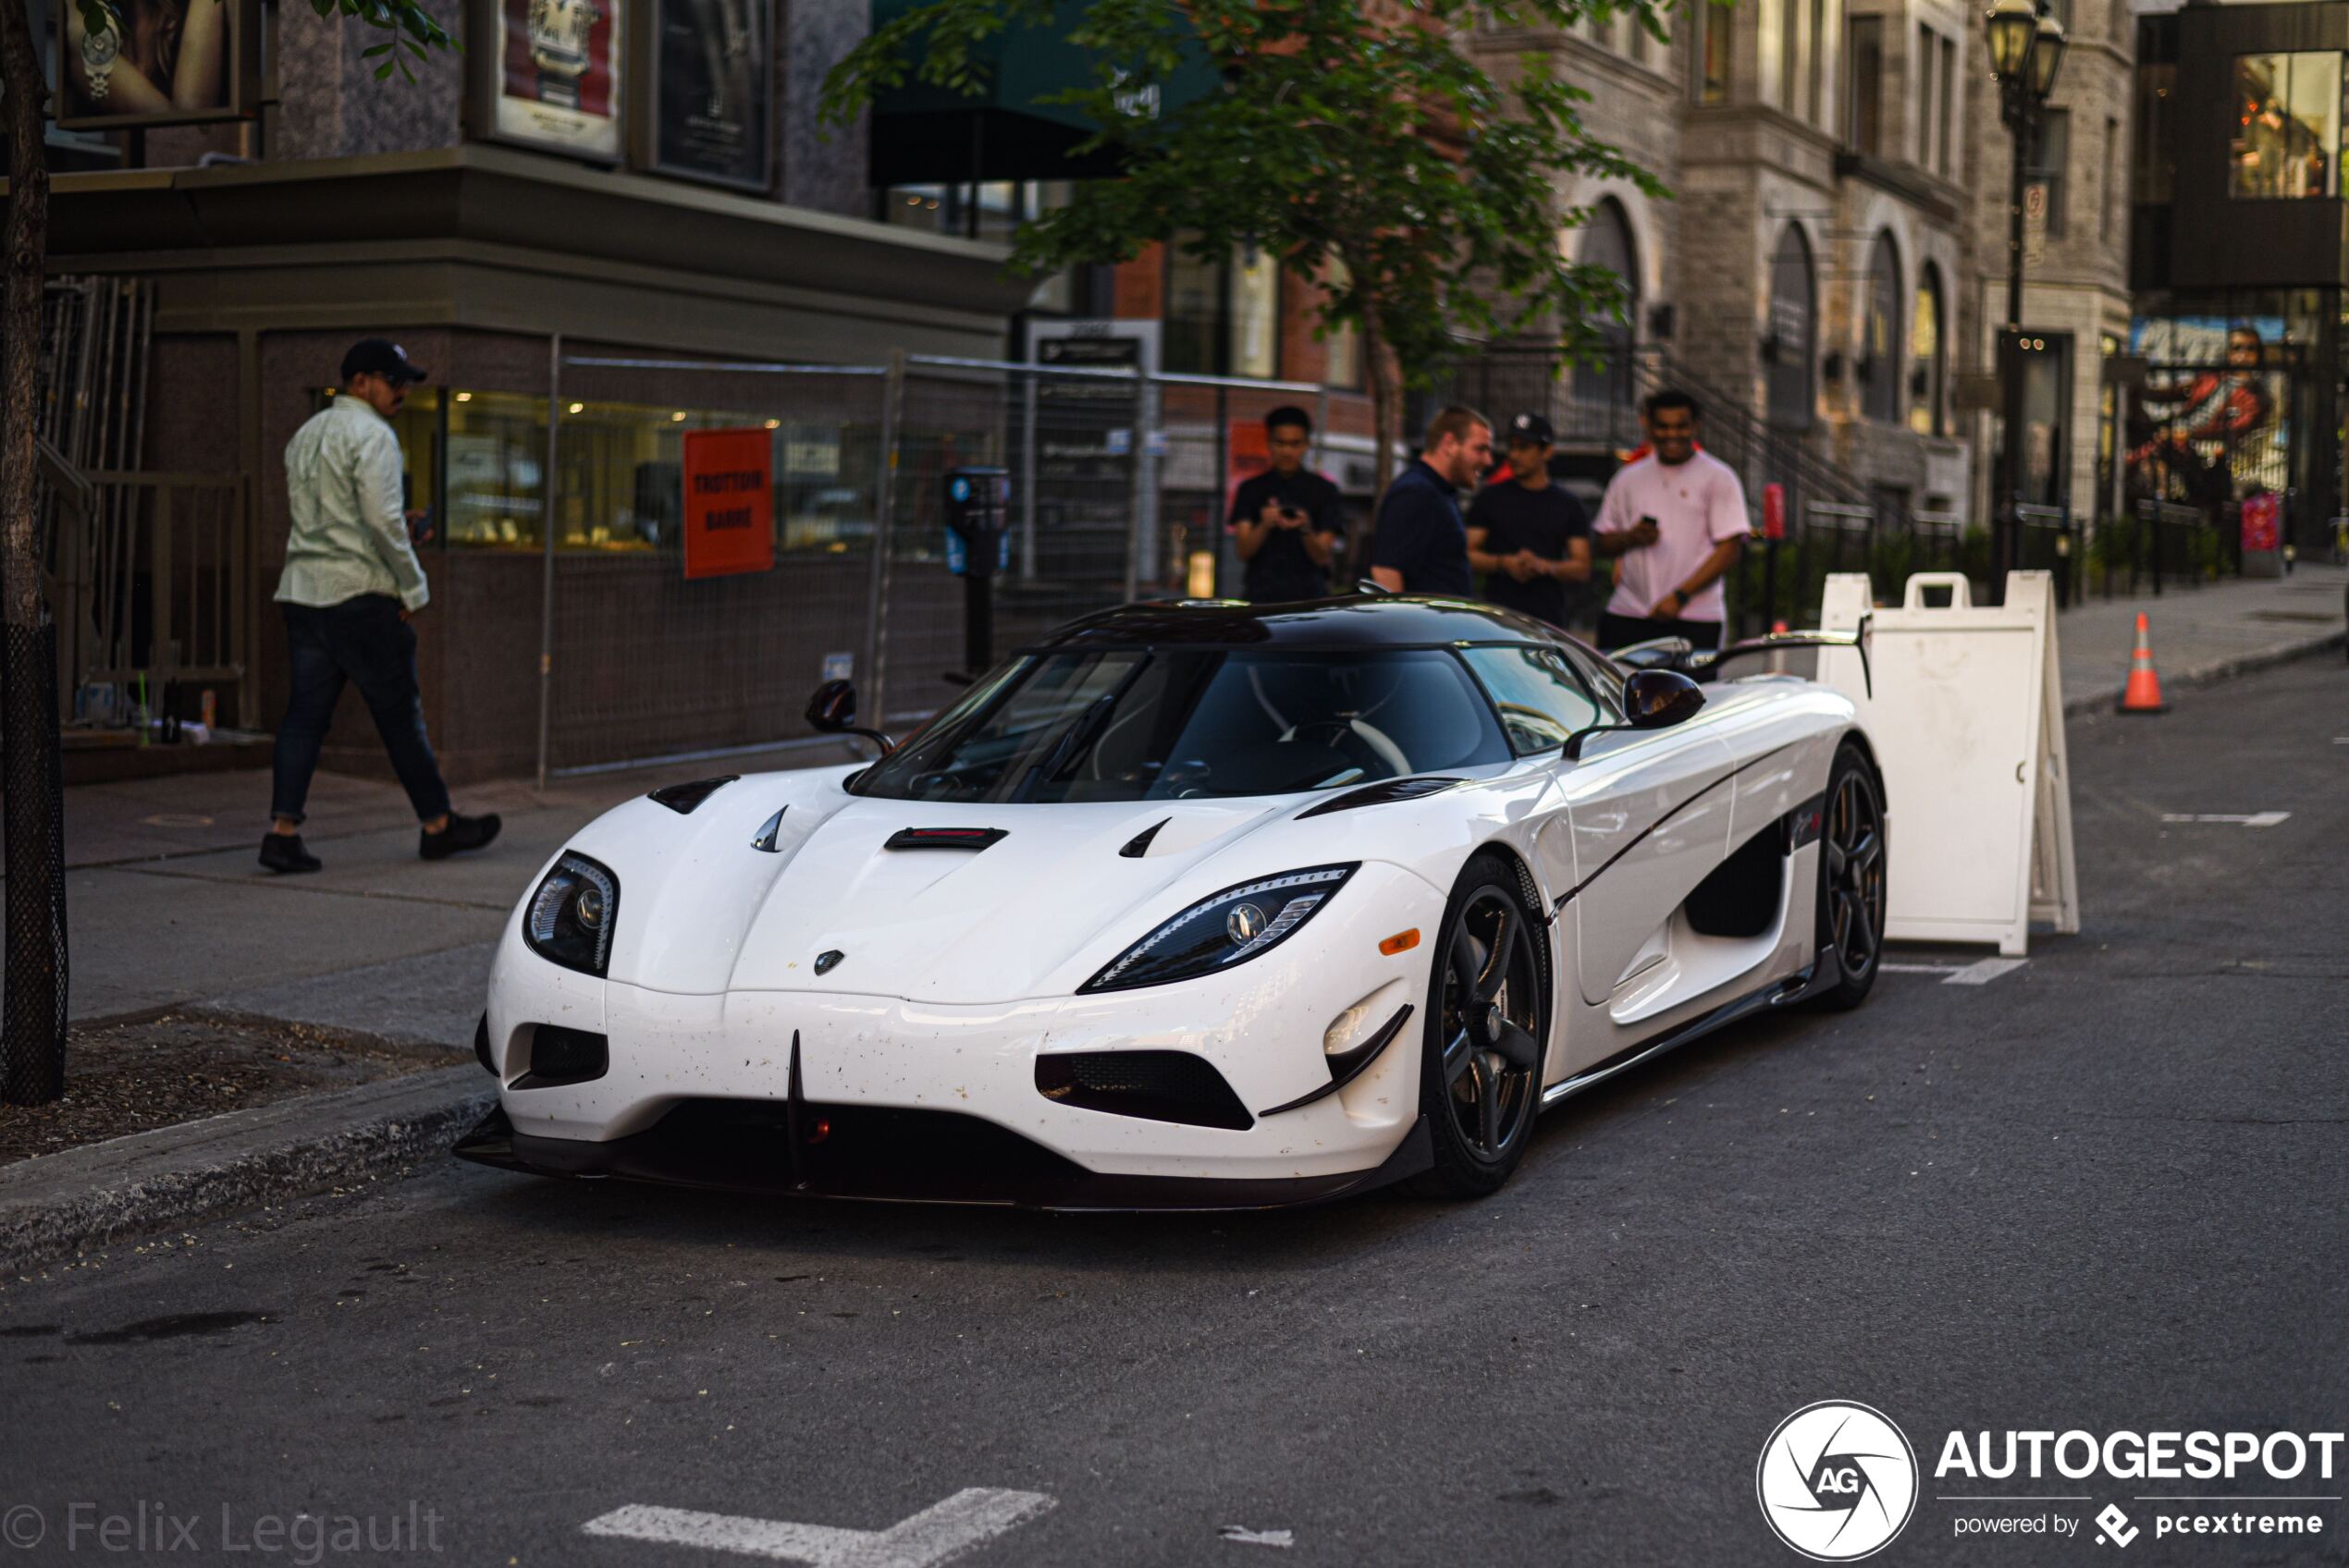 Koenigsegg Agera RS remains to be a showstopper